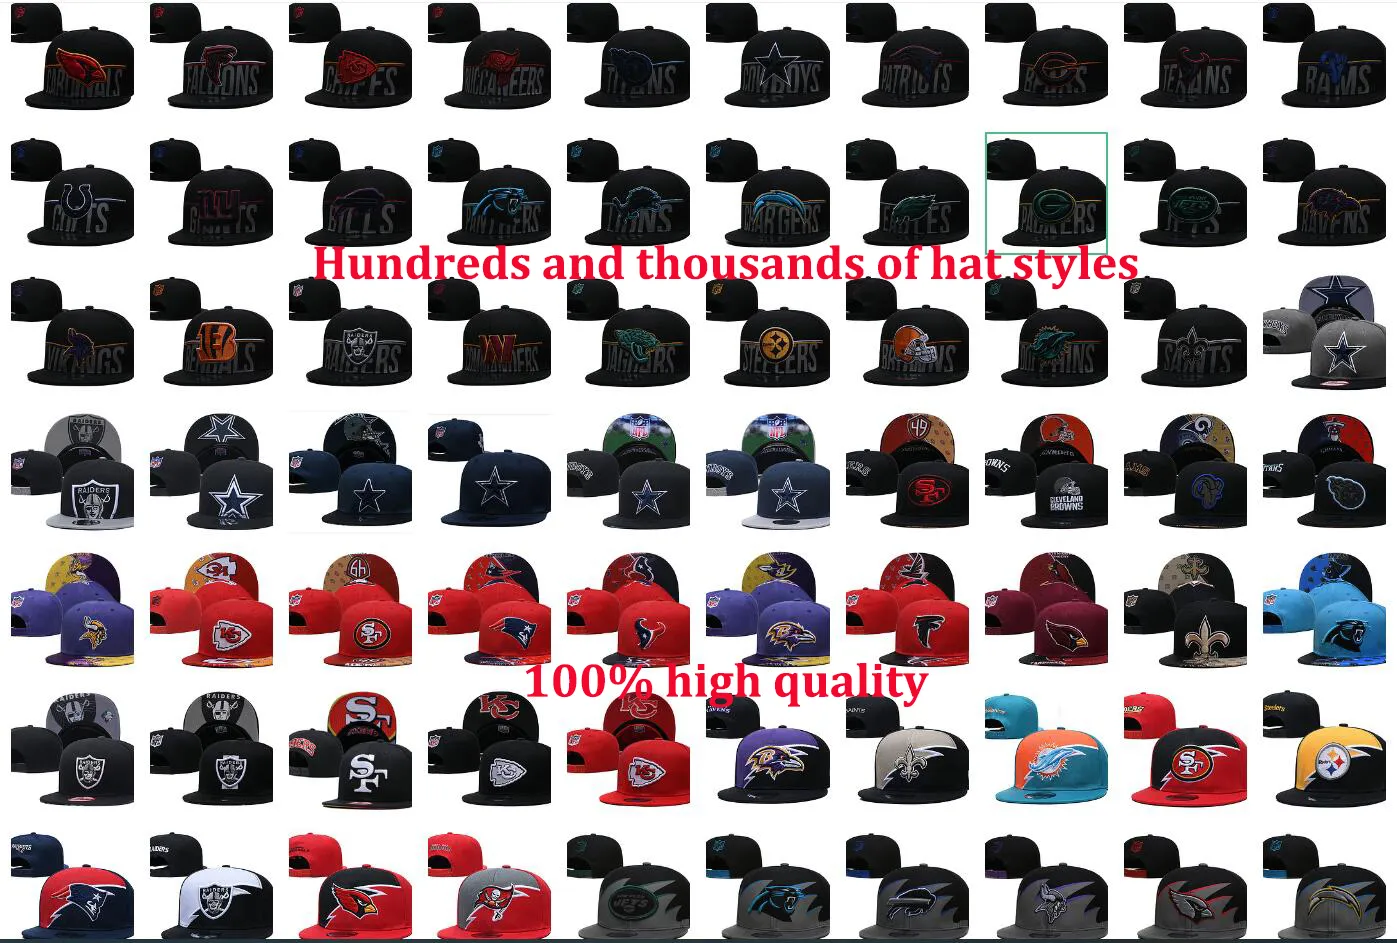 Thousands of New hot seller Beanies Hats American Football 32 teams Sports Winter Beanies Knitted ball global shipped